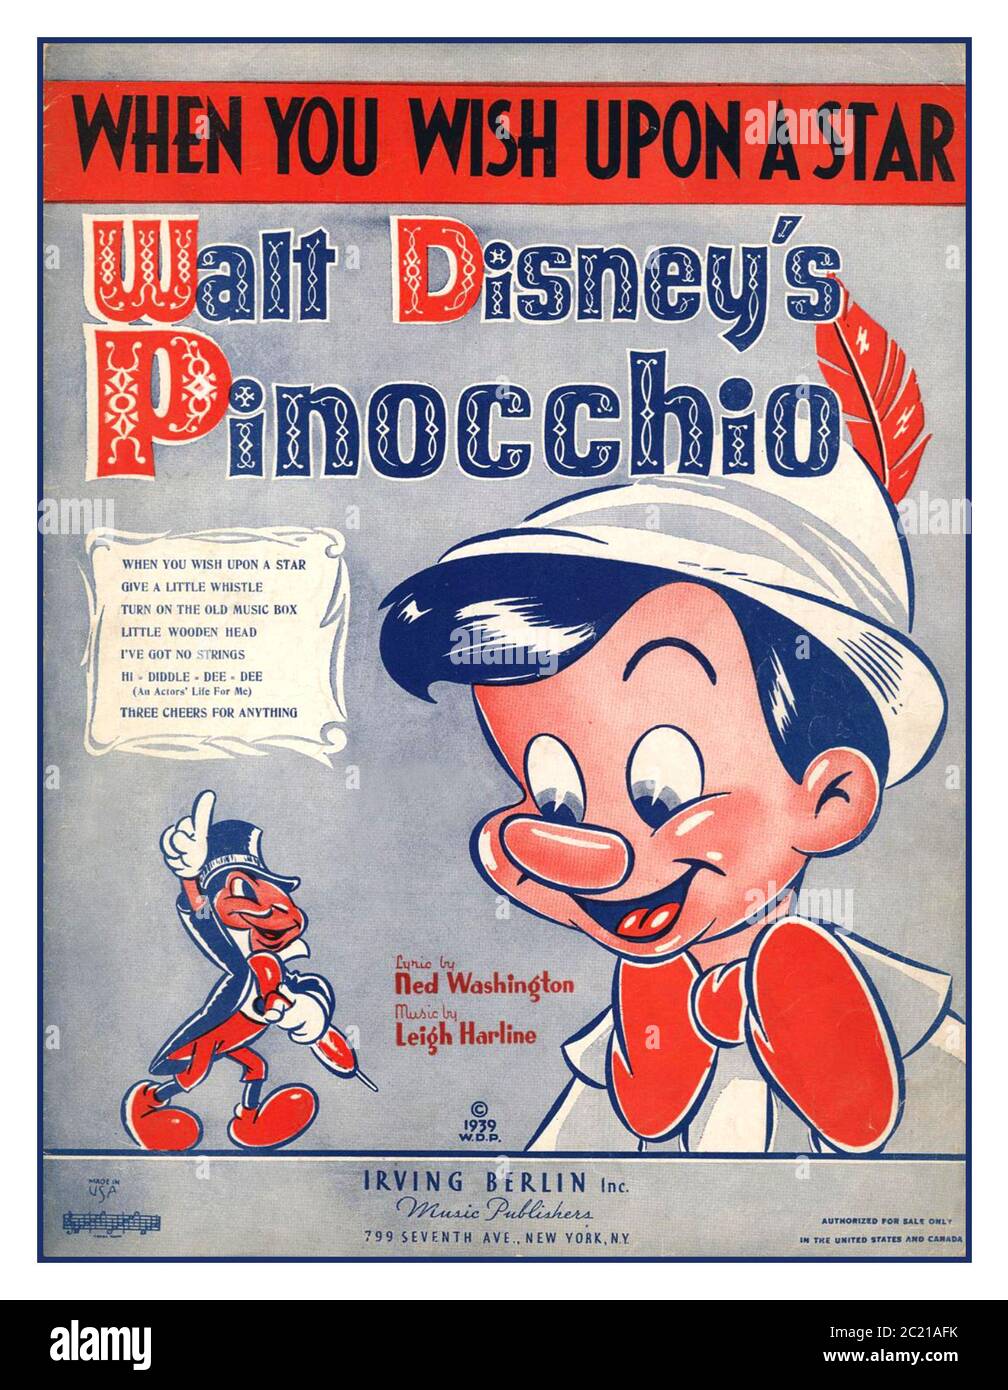 PINOCCHIO Sheet Music Front Cover. Ned Washington and Leigh Harline wrote the iconic  “When You Wish Upon A Star” for the animated film “Pinocchio.” The Academy Award winning song would go on to become the signature theme of the Walt Disney Company. This sheet music was published in 1939 by The Irving Berlin Publishing Company, a year prior to the film’s opening. Stock Photo